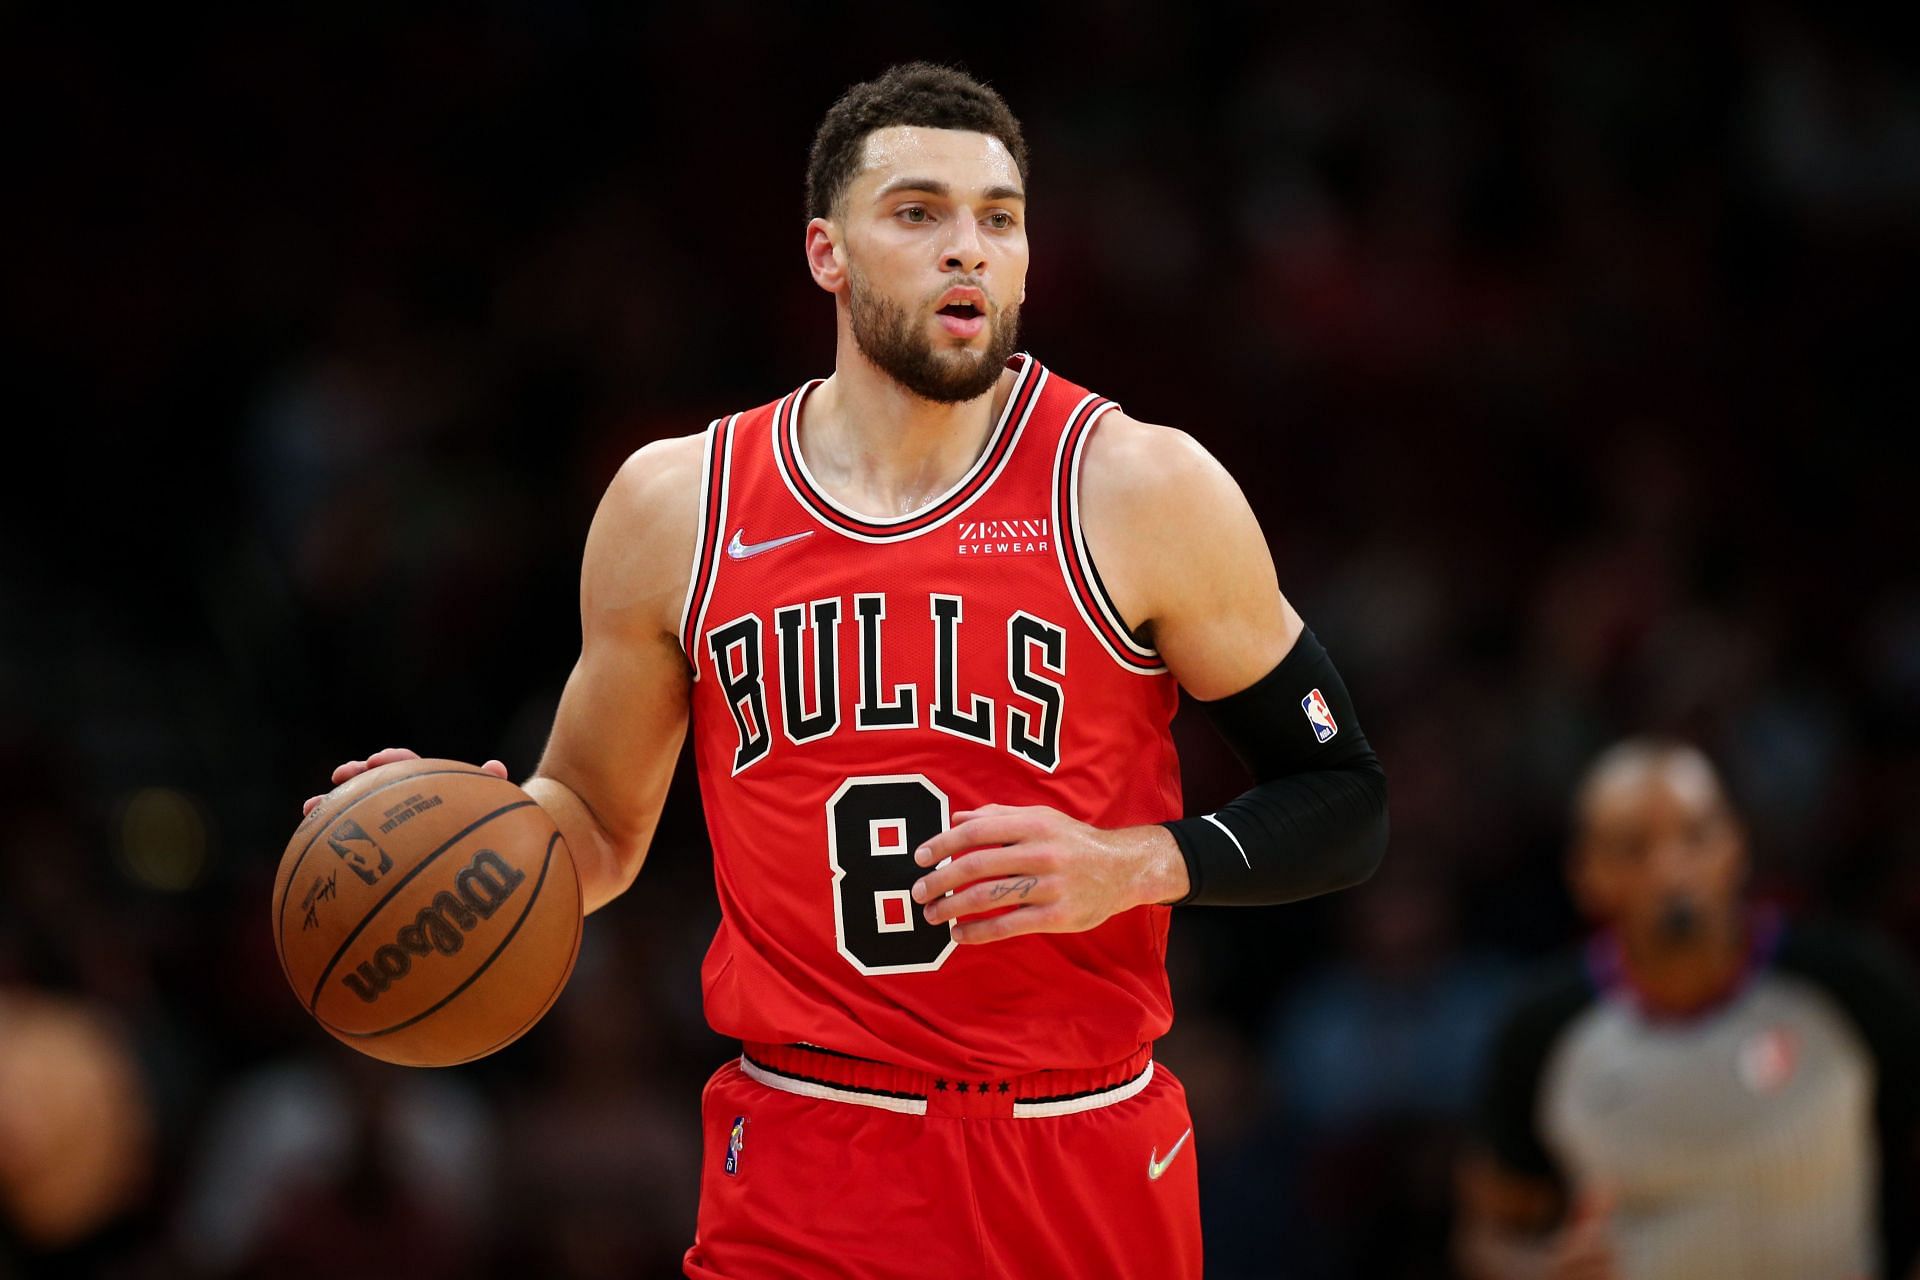 Zach LaVine brings the ball up in the Chicago Bulls vs Houston Rockets game.